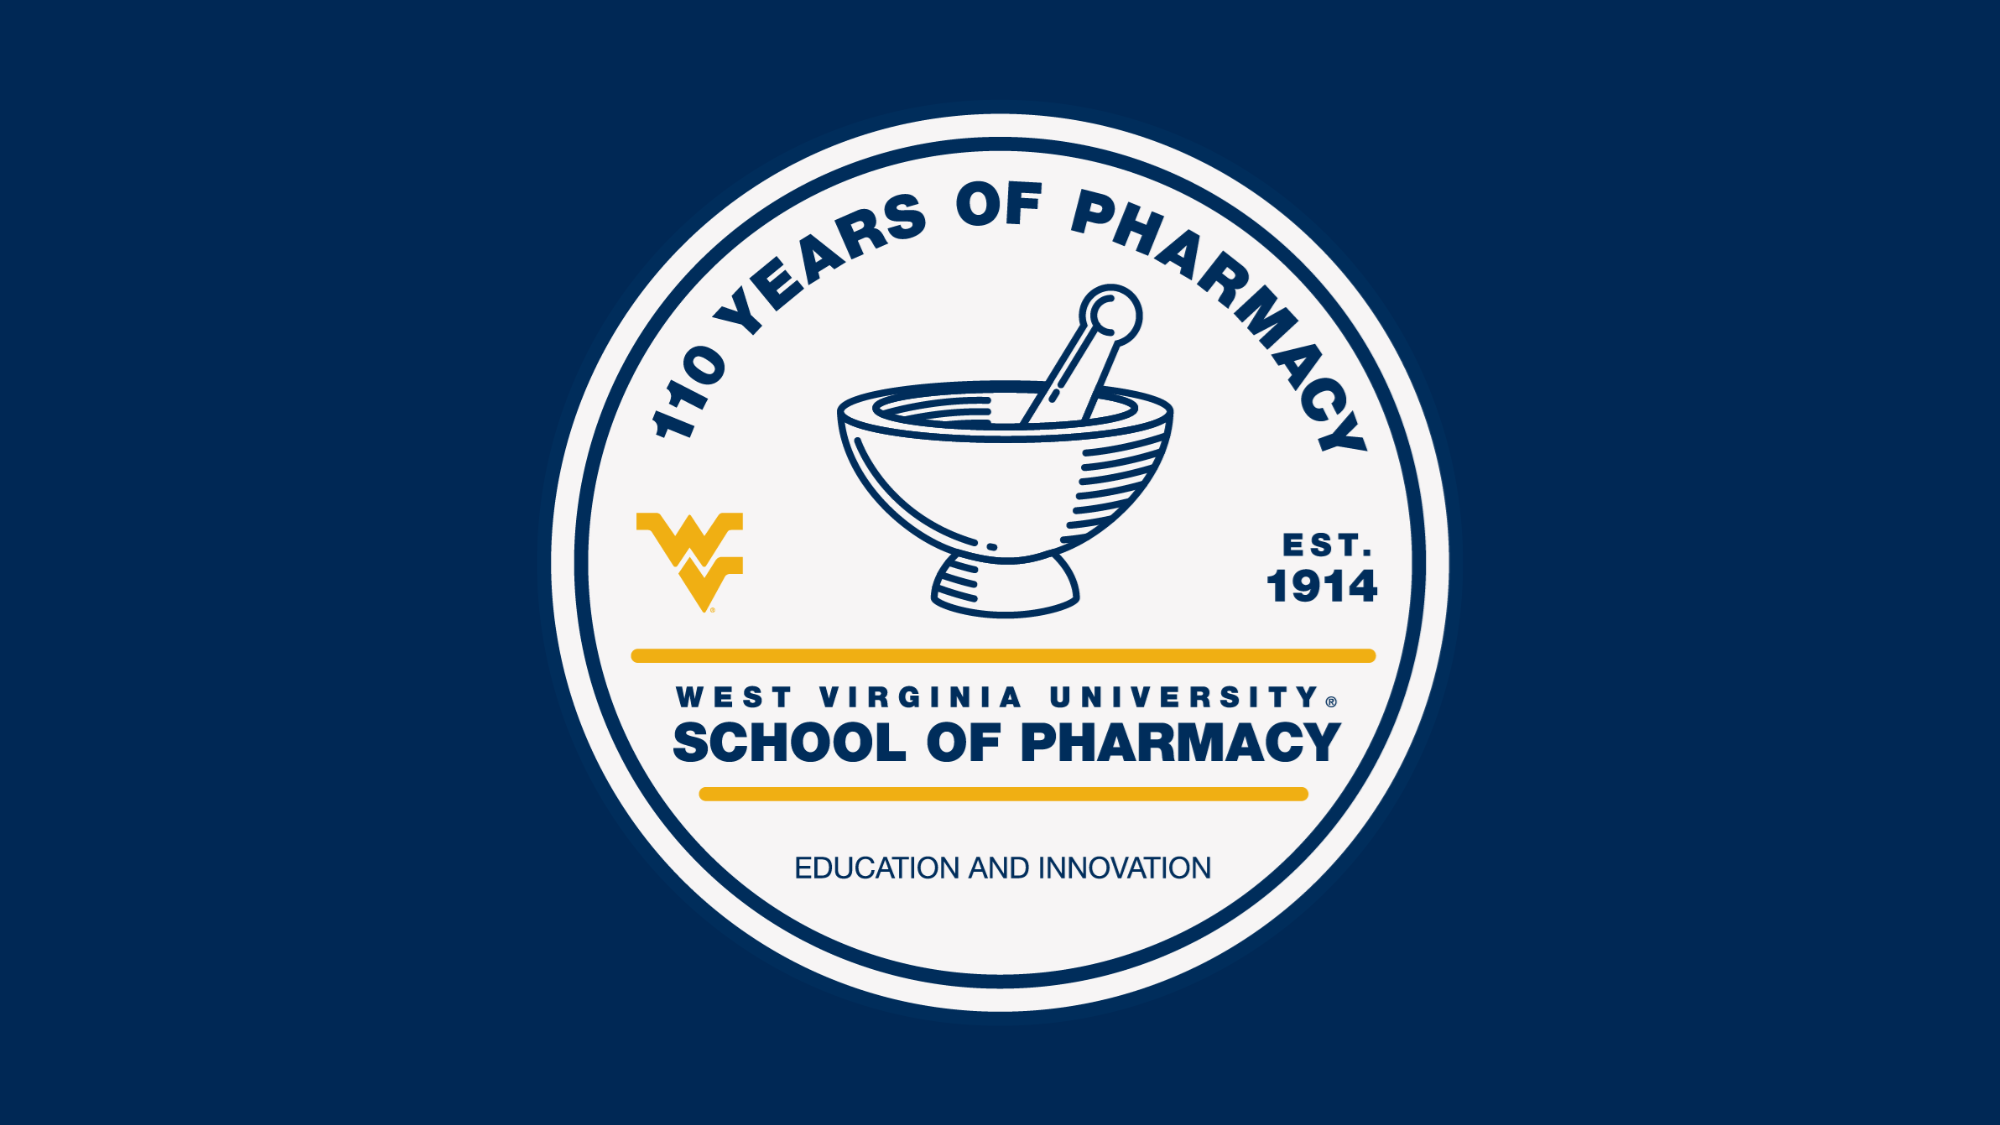 A blue graphic with the School of Pharmacy’s 110th Anniversary logo, which is blue, white and gold.